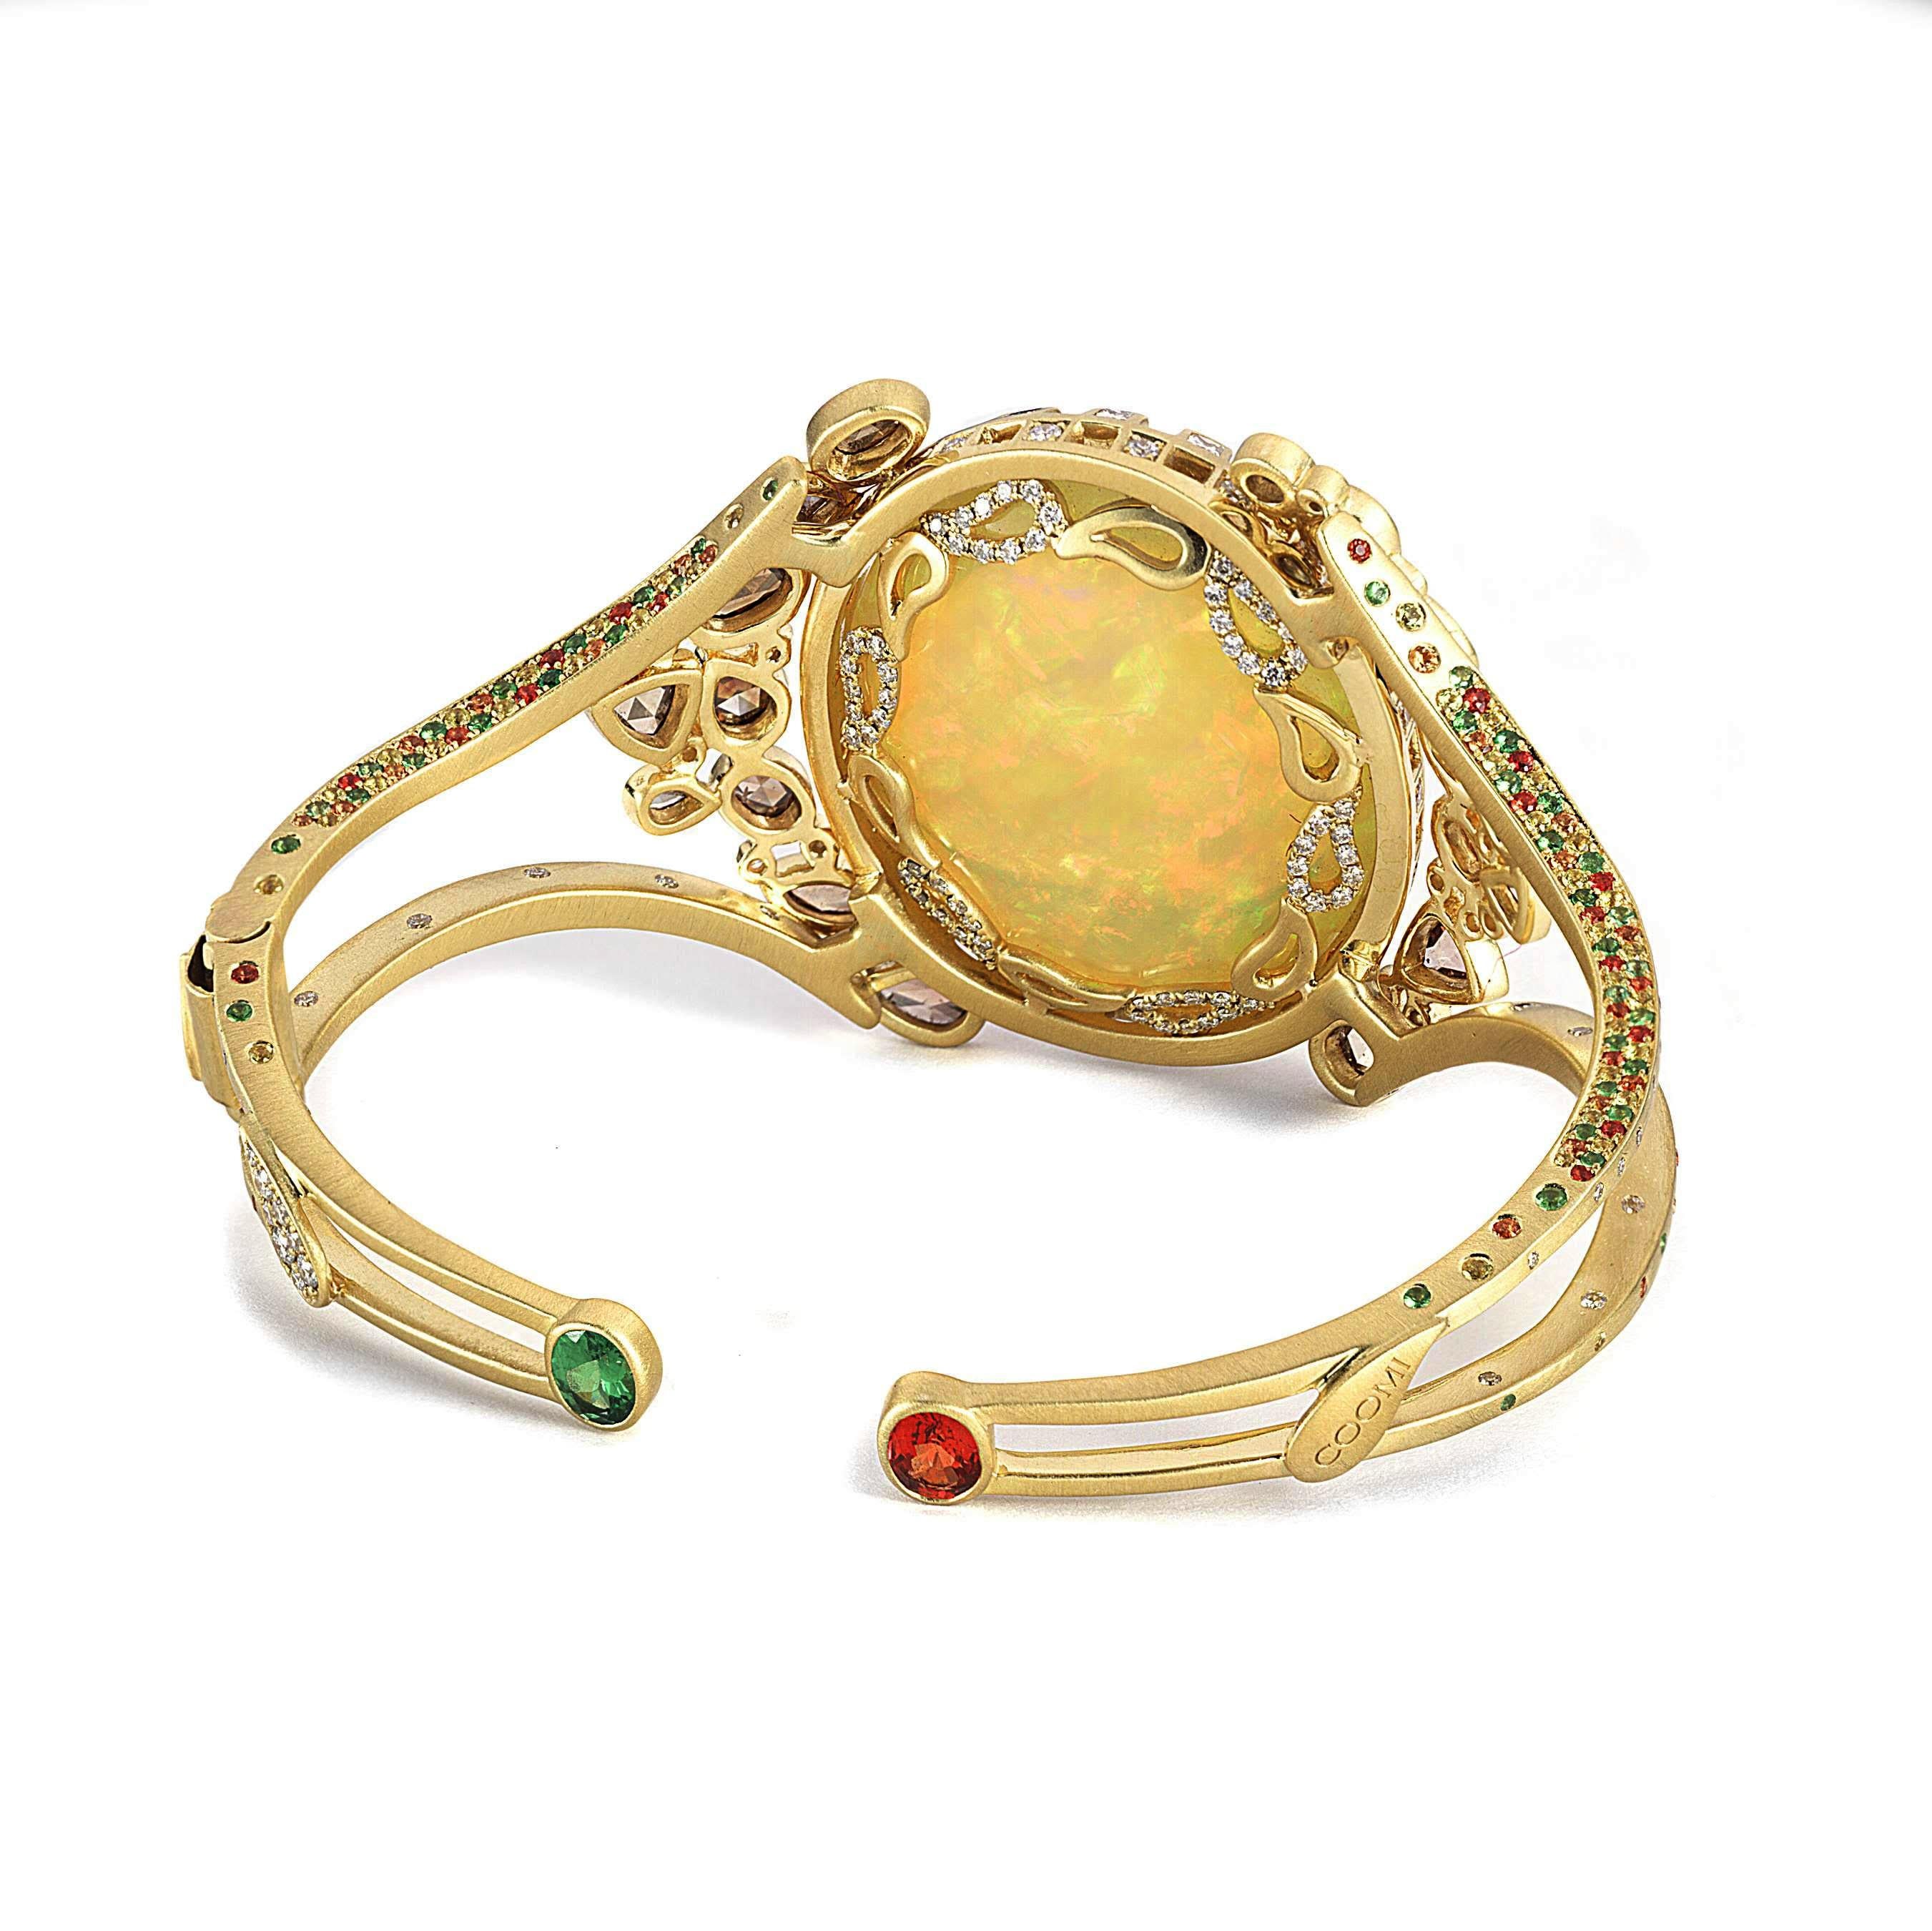 A stunning and bold statement piece set in rich 20 Karat Yellow Gold with Opal weighing approximately at 42.82cts and Diamonds at 2.46cts with brown diamonds 2.90cts. The rare cuff bracelet inspired by Art deco and Mosaic artwork and culture. This